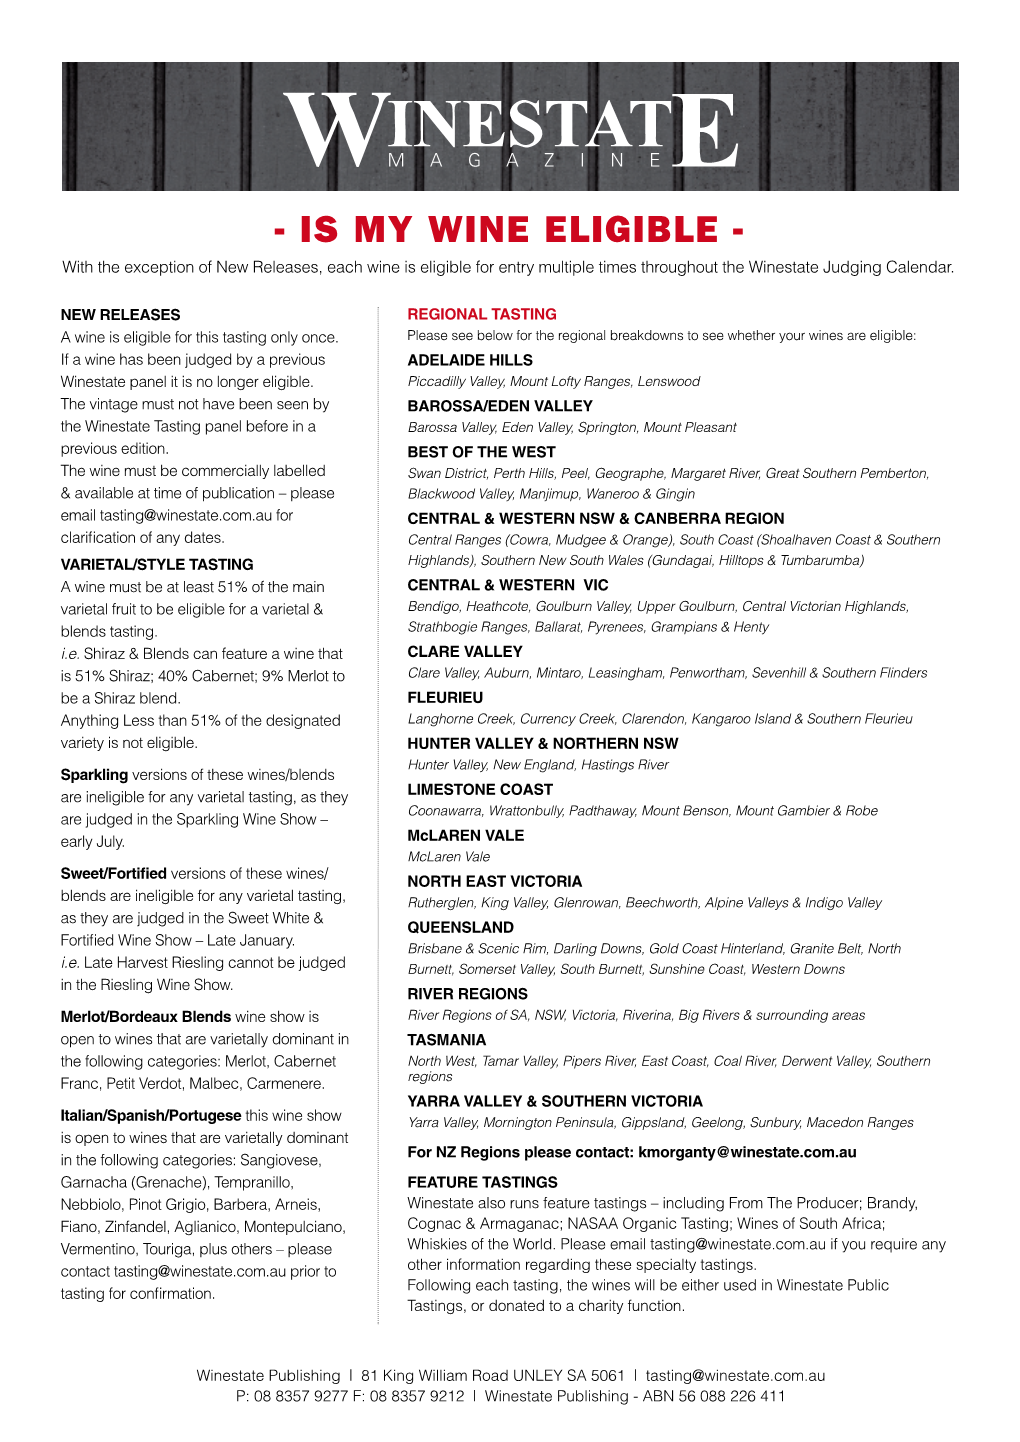 IS MY WINE ELIGIBLE - with the Exception of New Releases, Each Wine Is Eligible for Entry Multiple Times Throughout the Winestate Judging Calendar